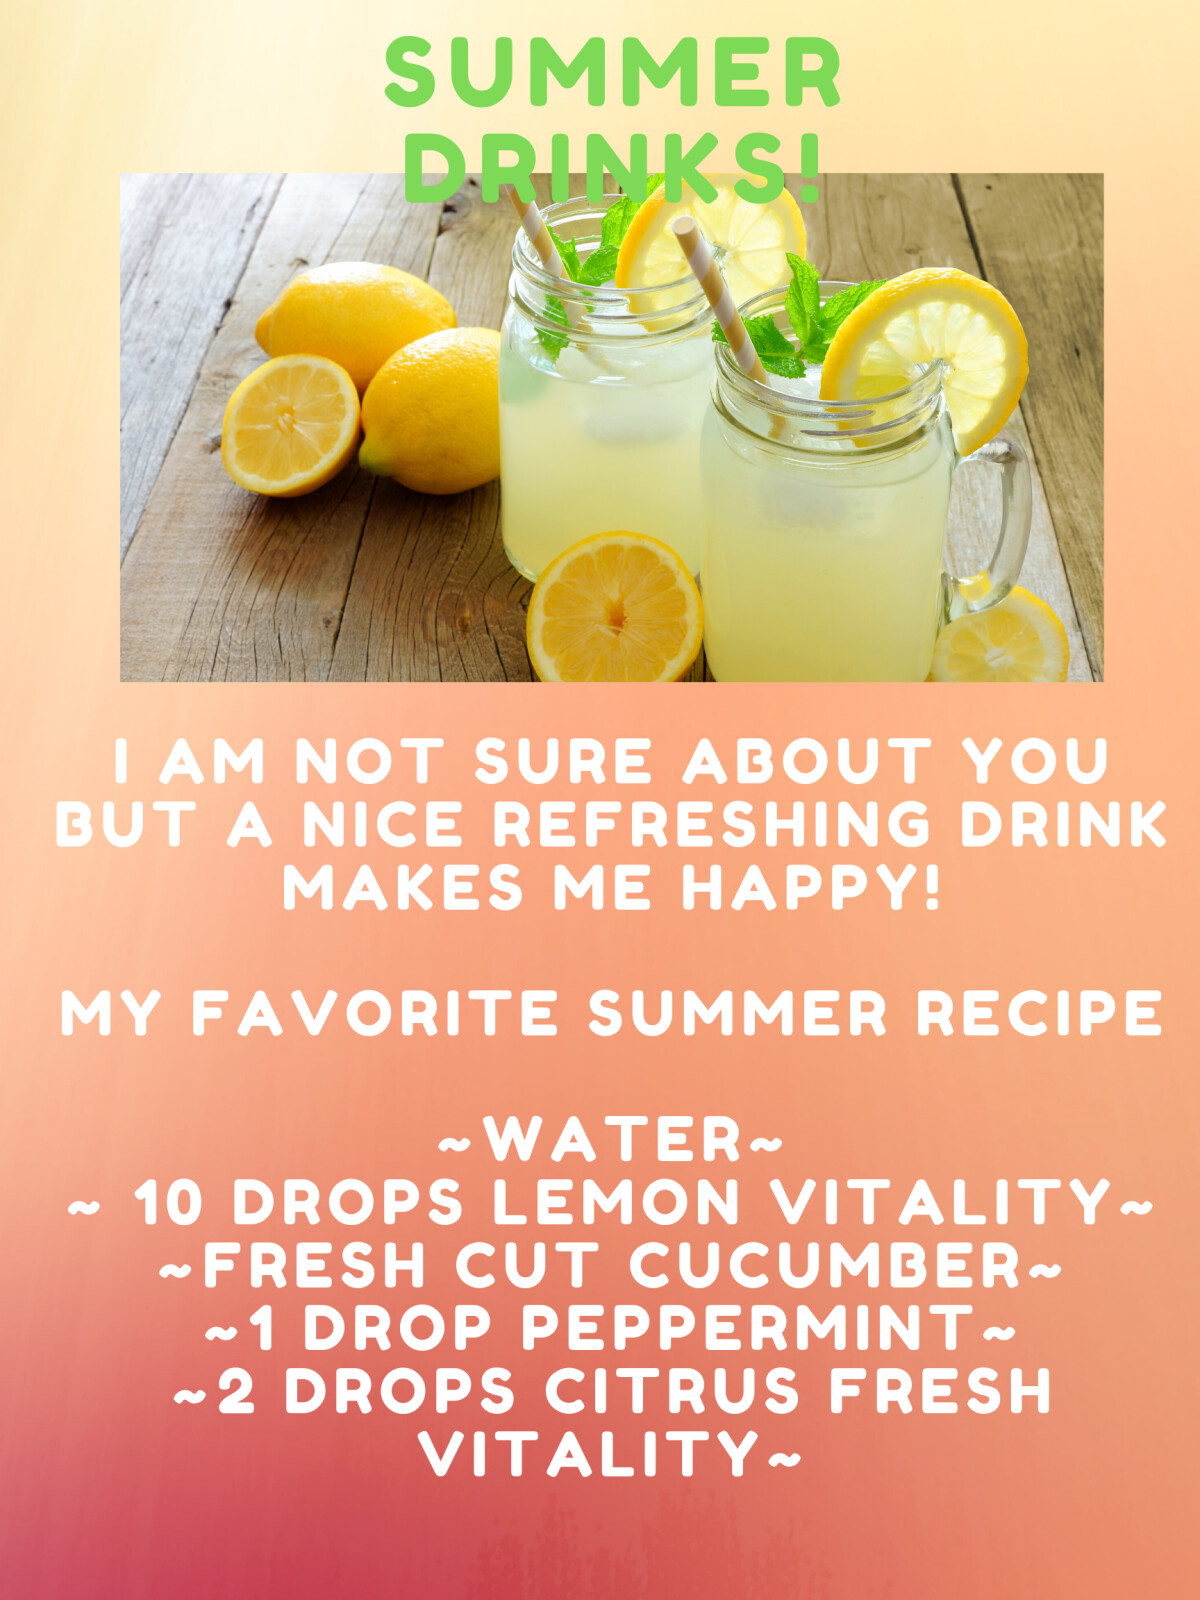 3 things to help refresh your mind this summer!